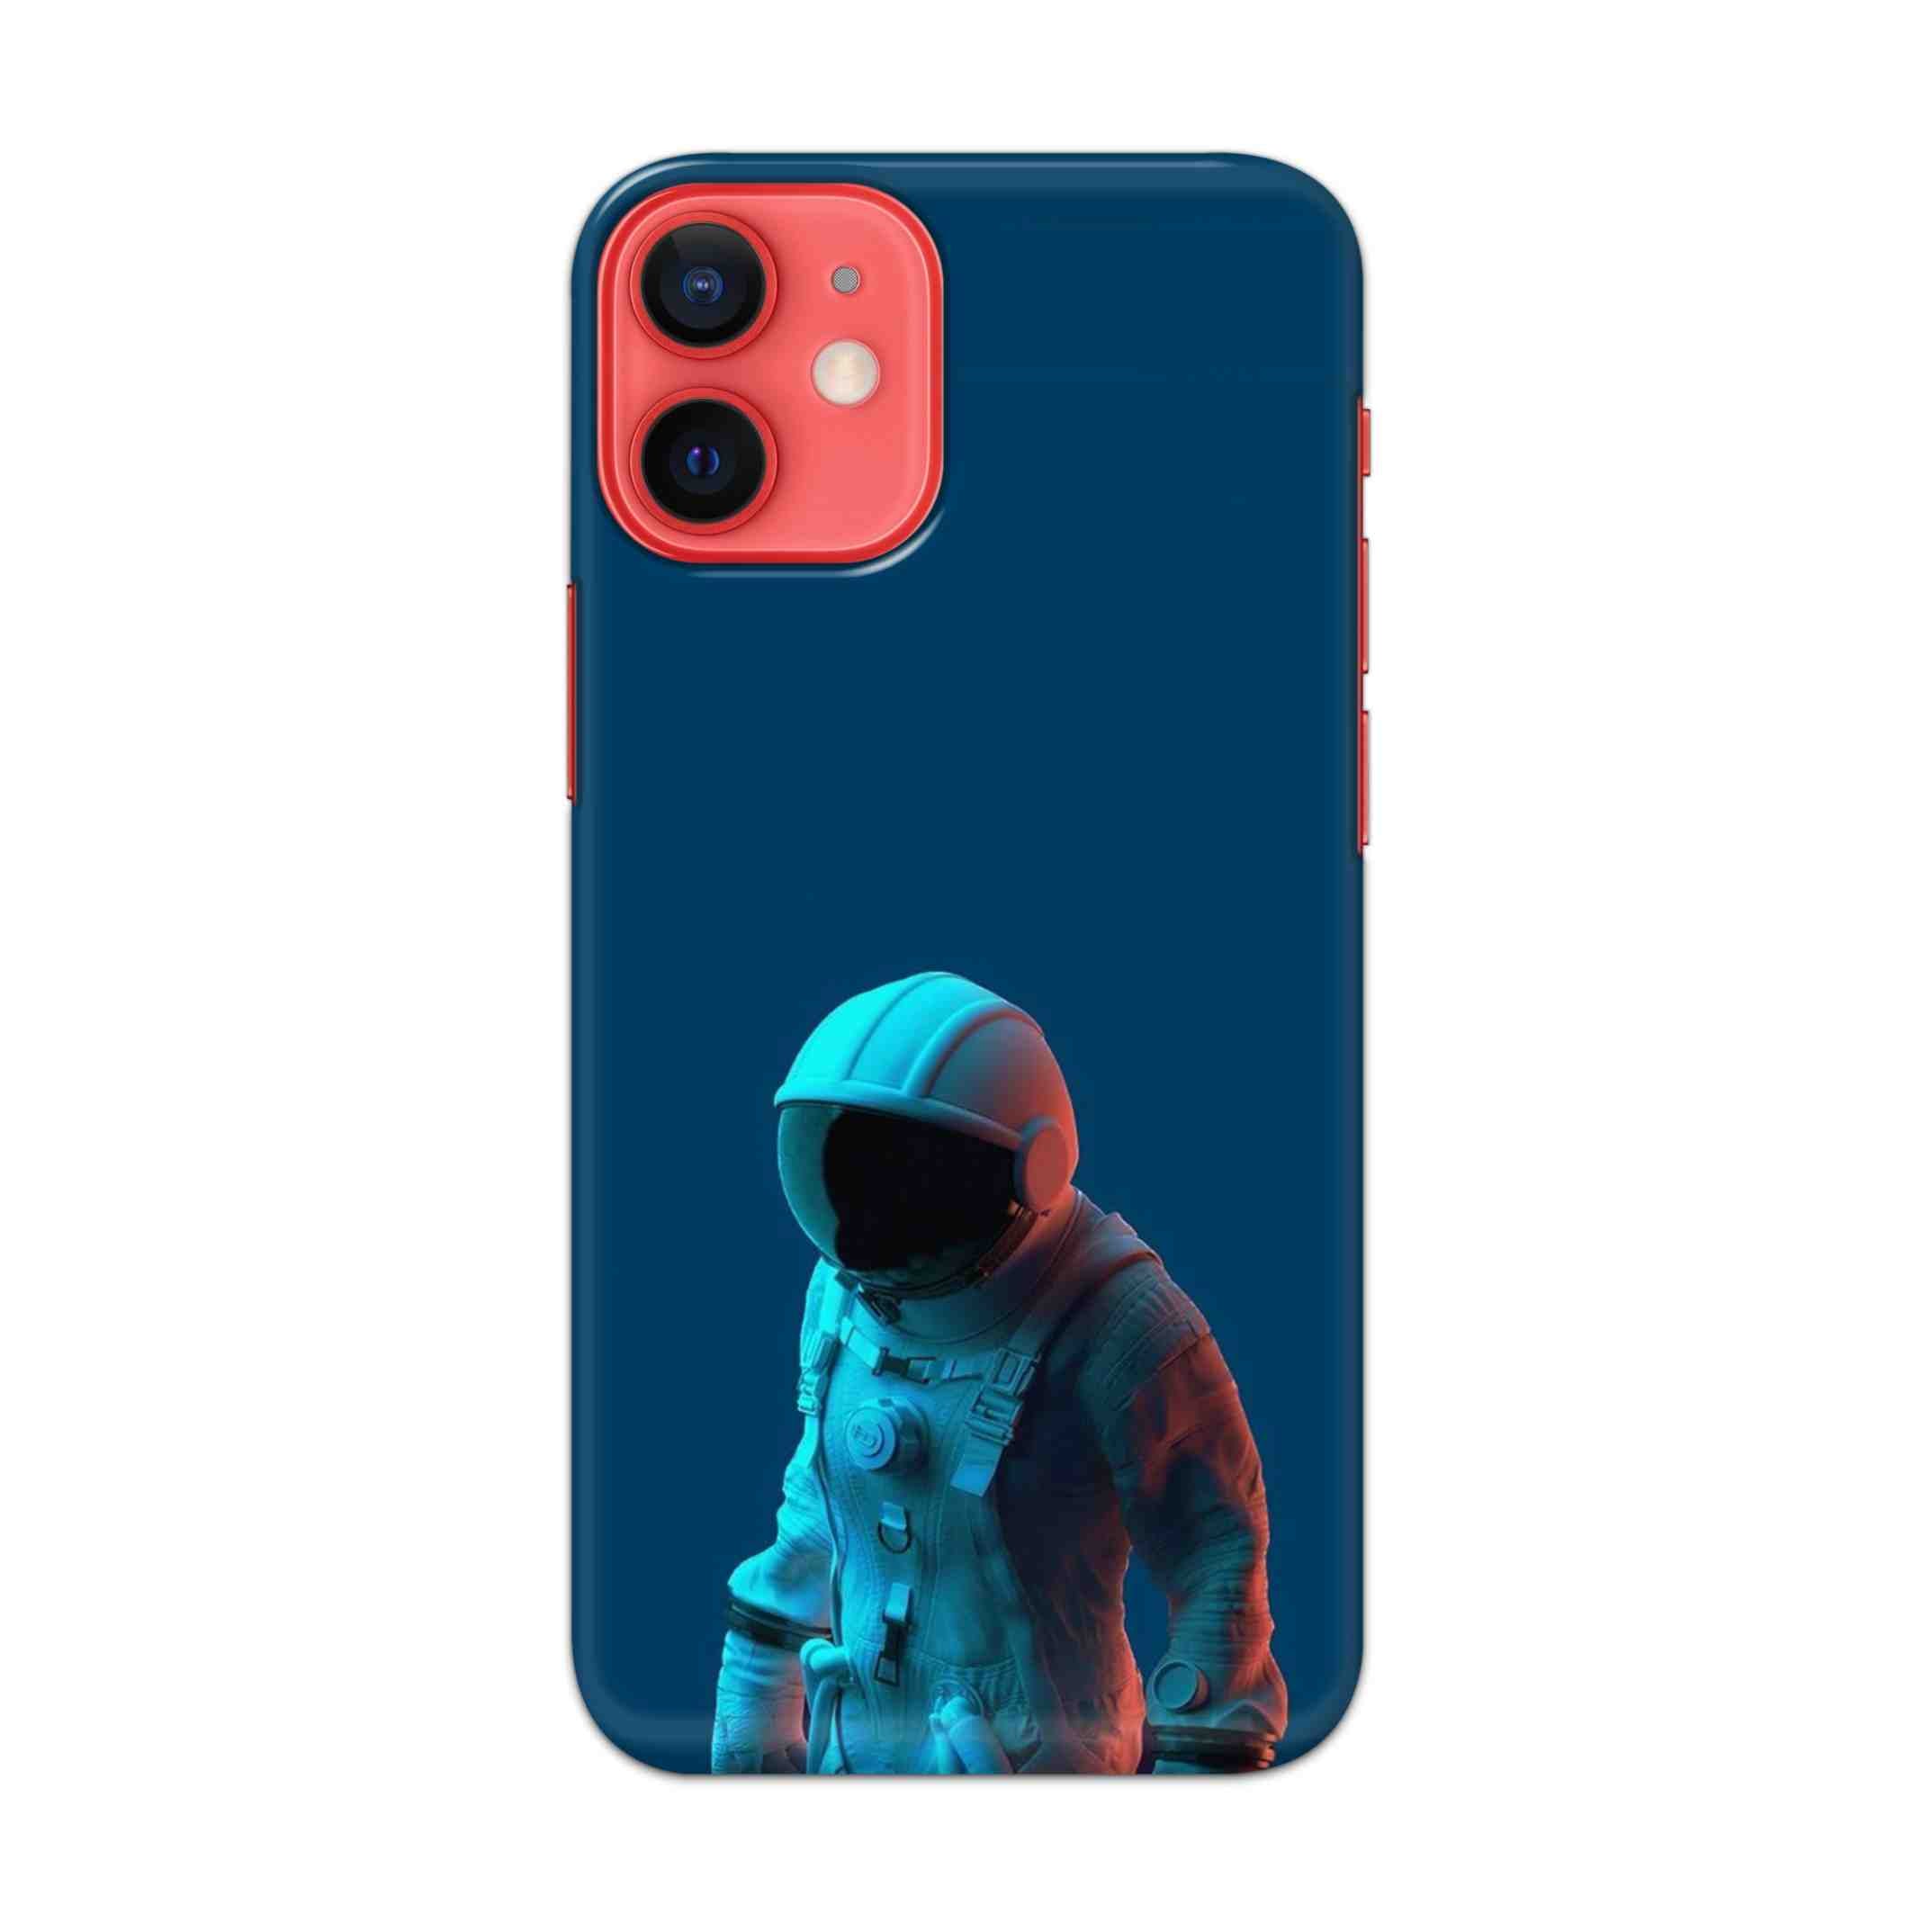 Buy Blue Astranaut Hard Back Mobile Phone Case/Cover For Apple iPhone 12 mini Online